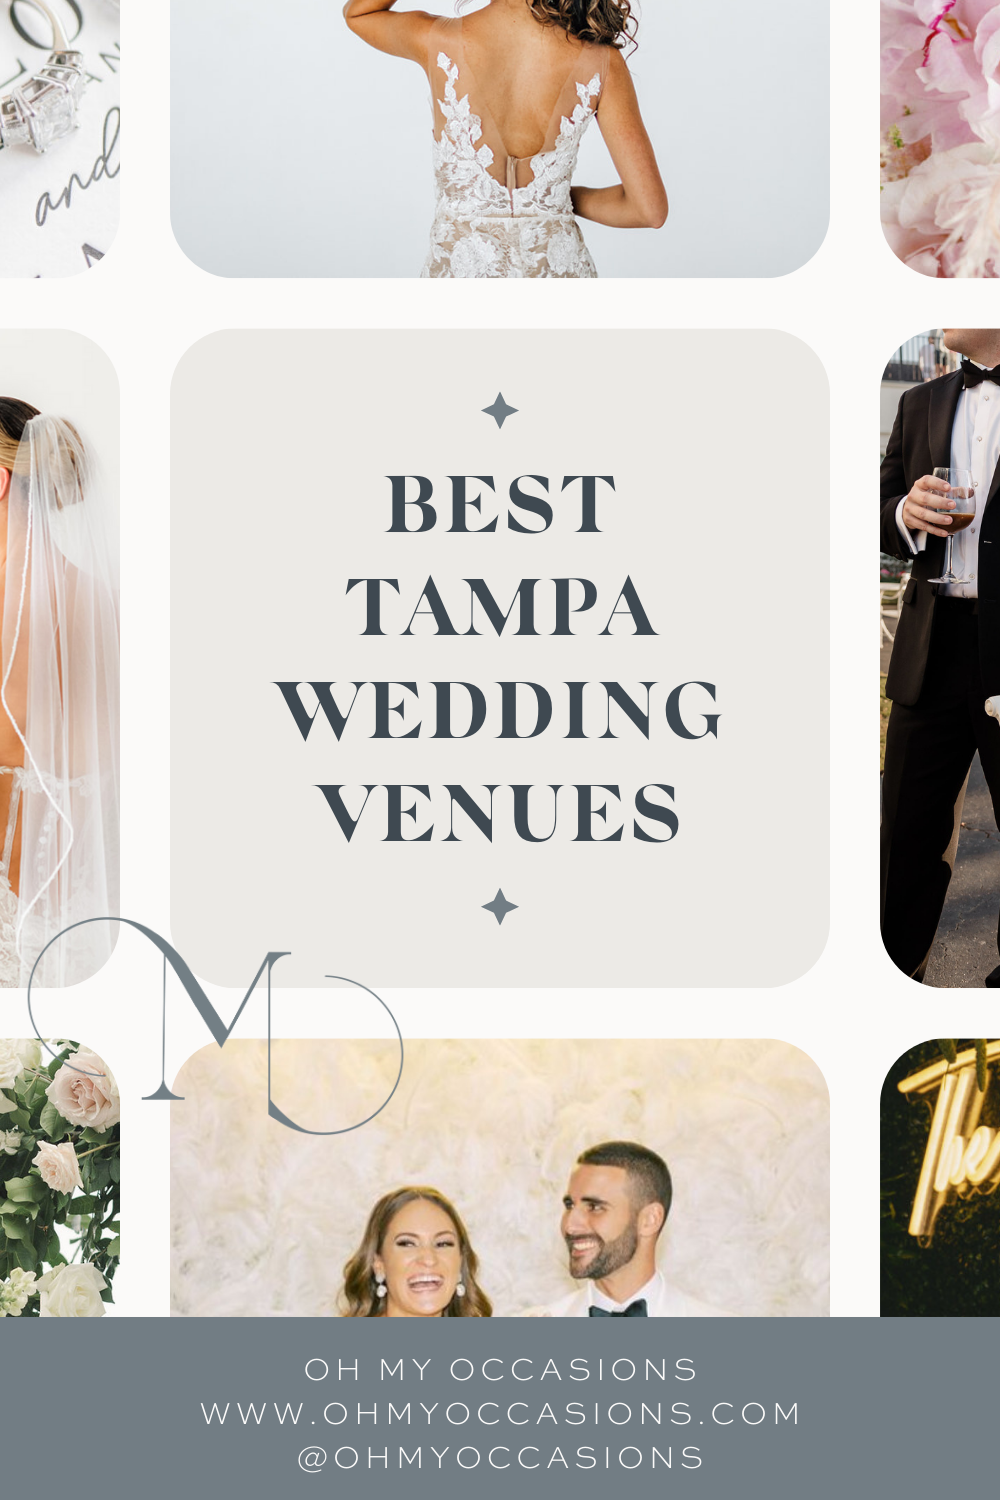 a comprehensive list of the best wedding venues in tampa to have your tampa wedding venue